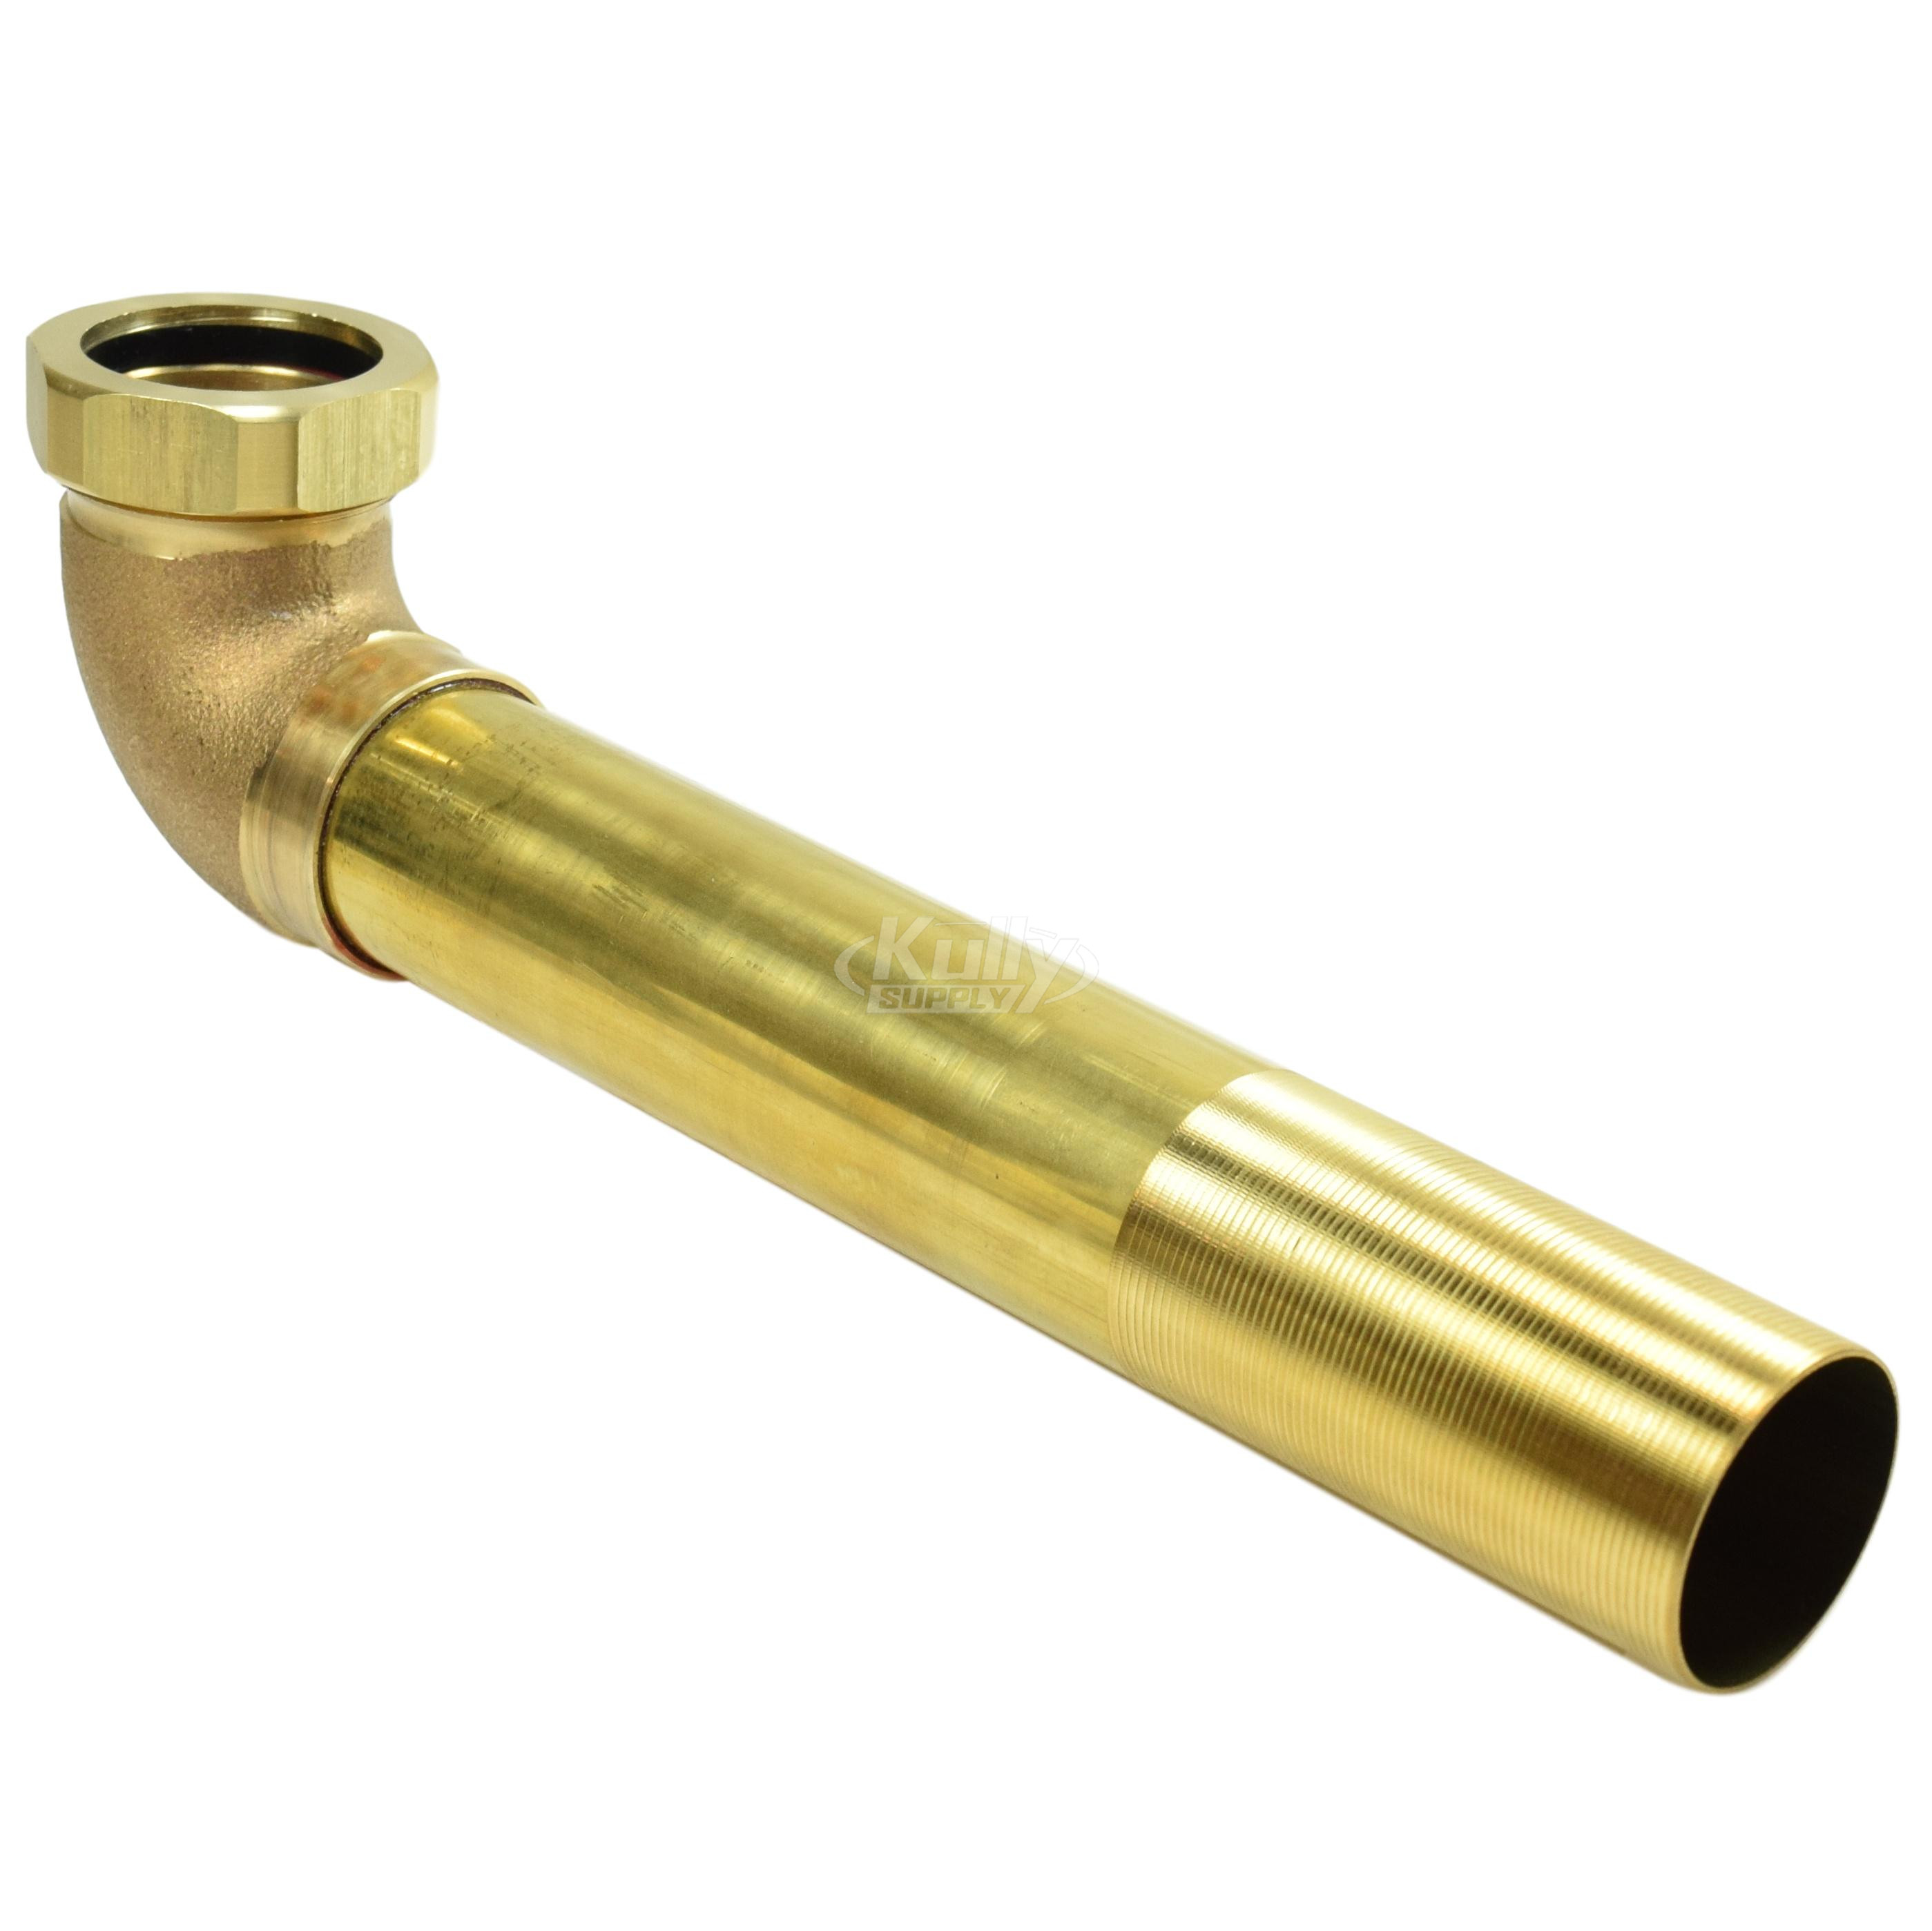 Sloan F-25-A Rough Brass Slip Joint Elbow (with Tail 1-1/2" x 10" from C to E)